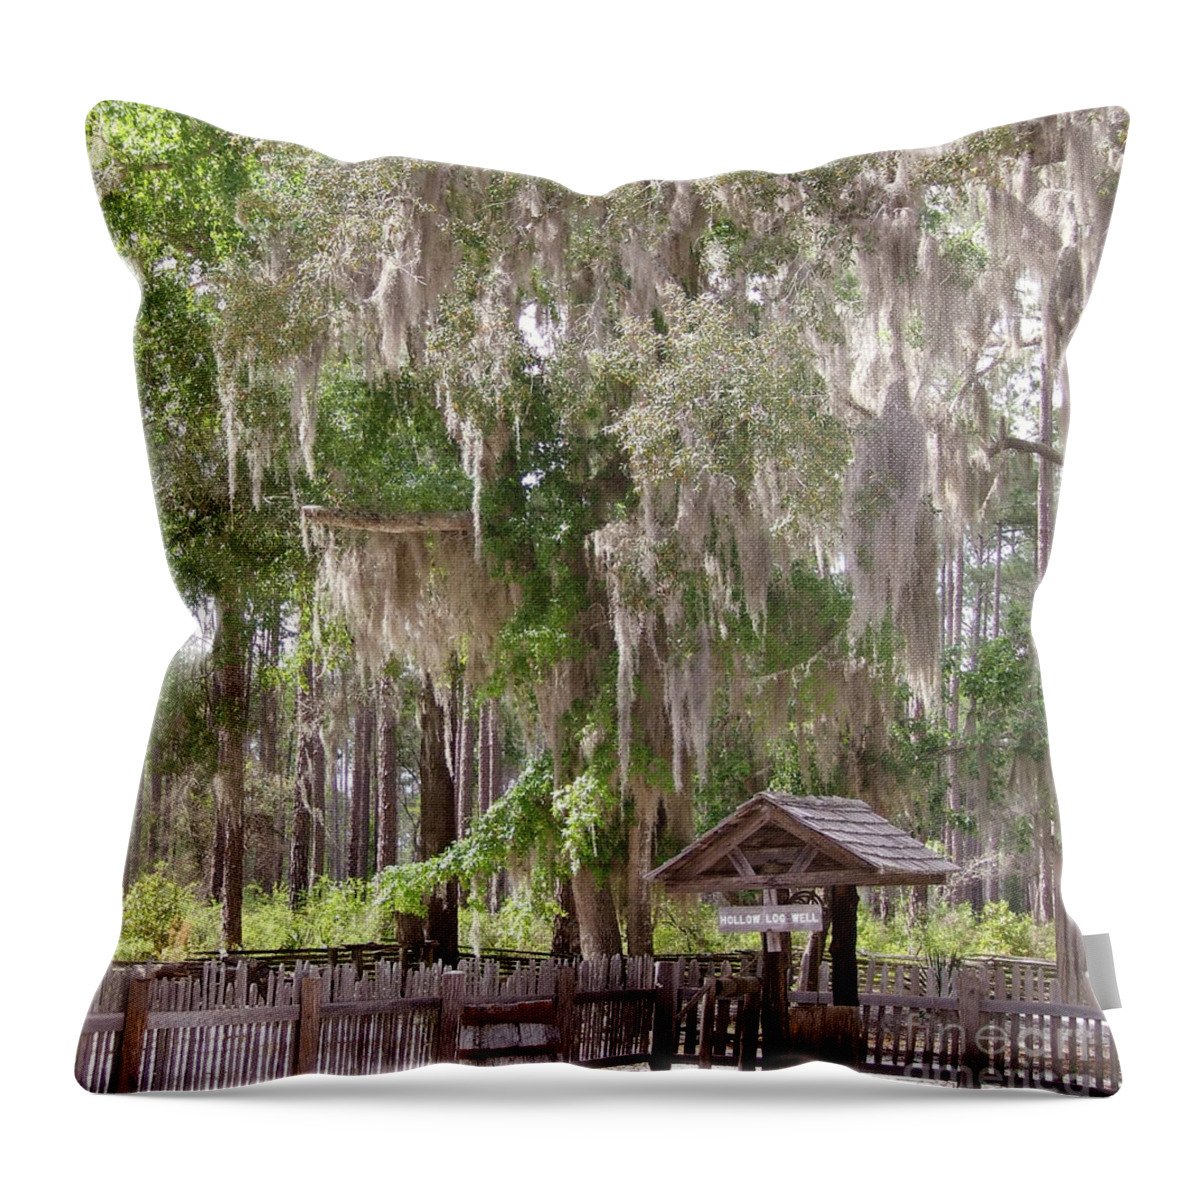 Well Throw Pillow featuring the photograph Water well by Andrea Anderegg